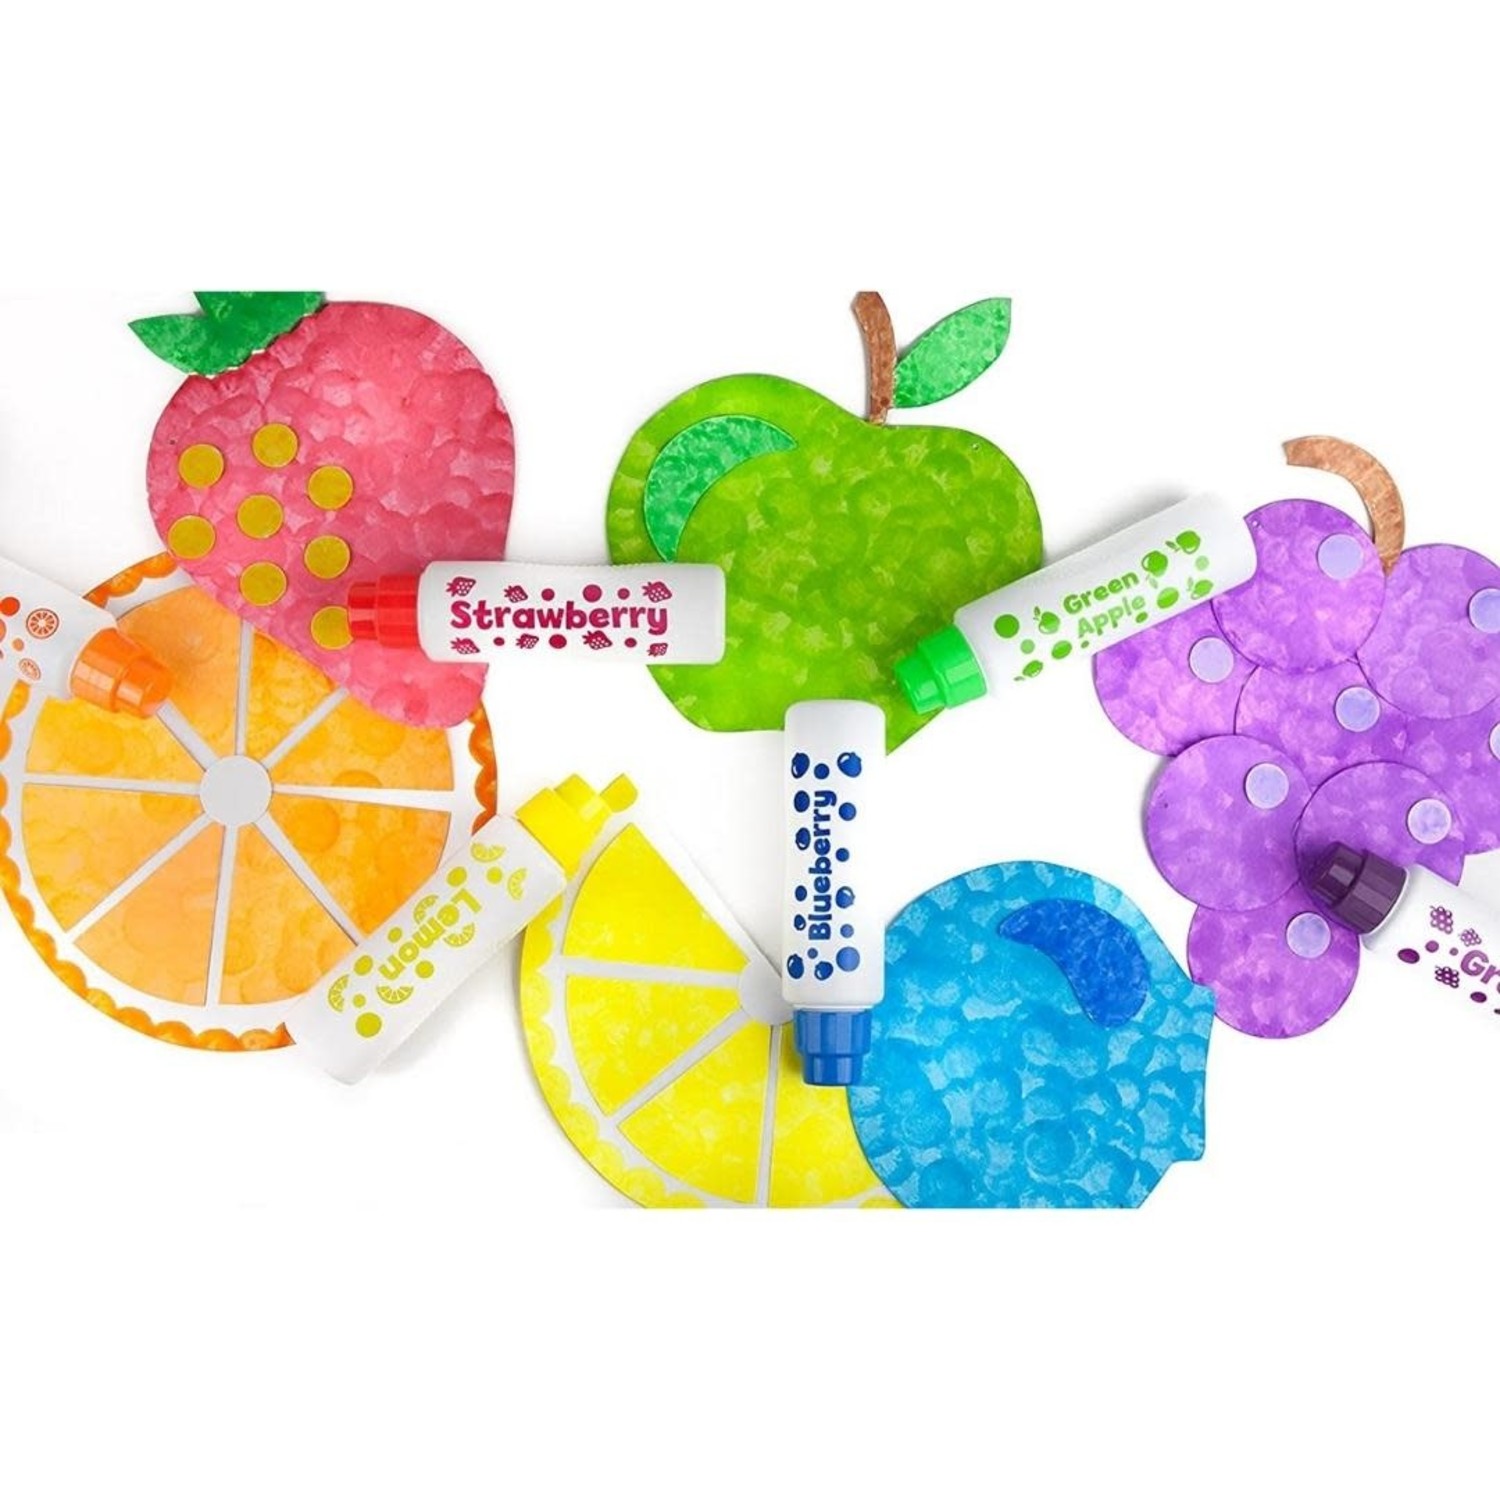 Fruit Scented Washable Dot Markers for Kids and Toddlers Educational Set of  6 Pack by Do A Dot Art, The Original Dot Marker